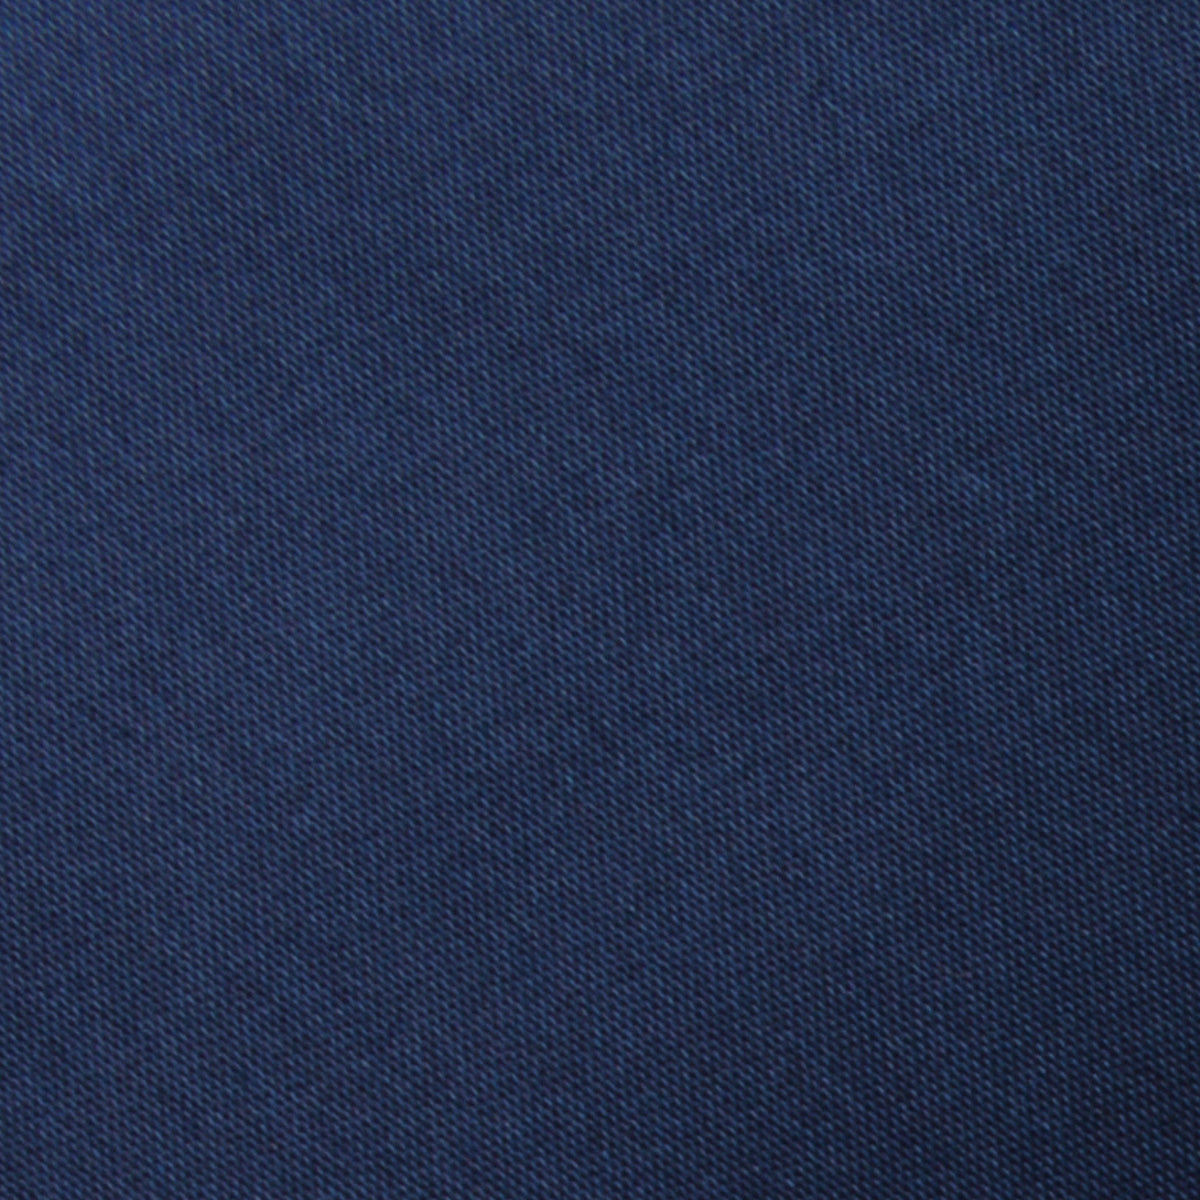 Admiral Navy Blue Satin Self Bow Tie Fabric